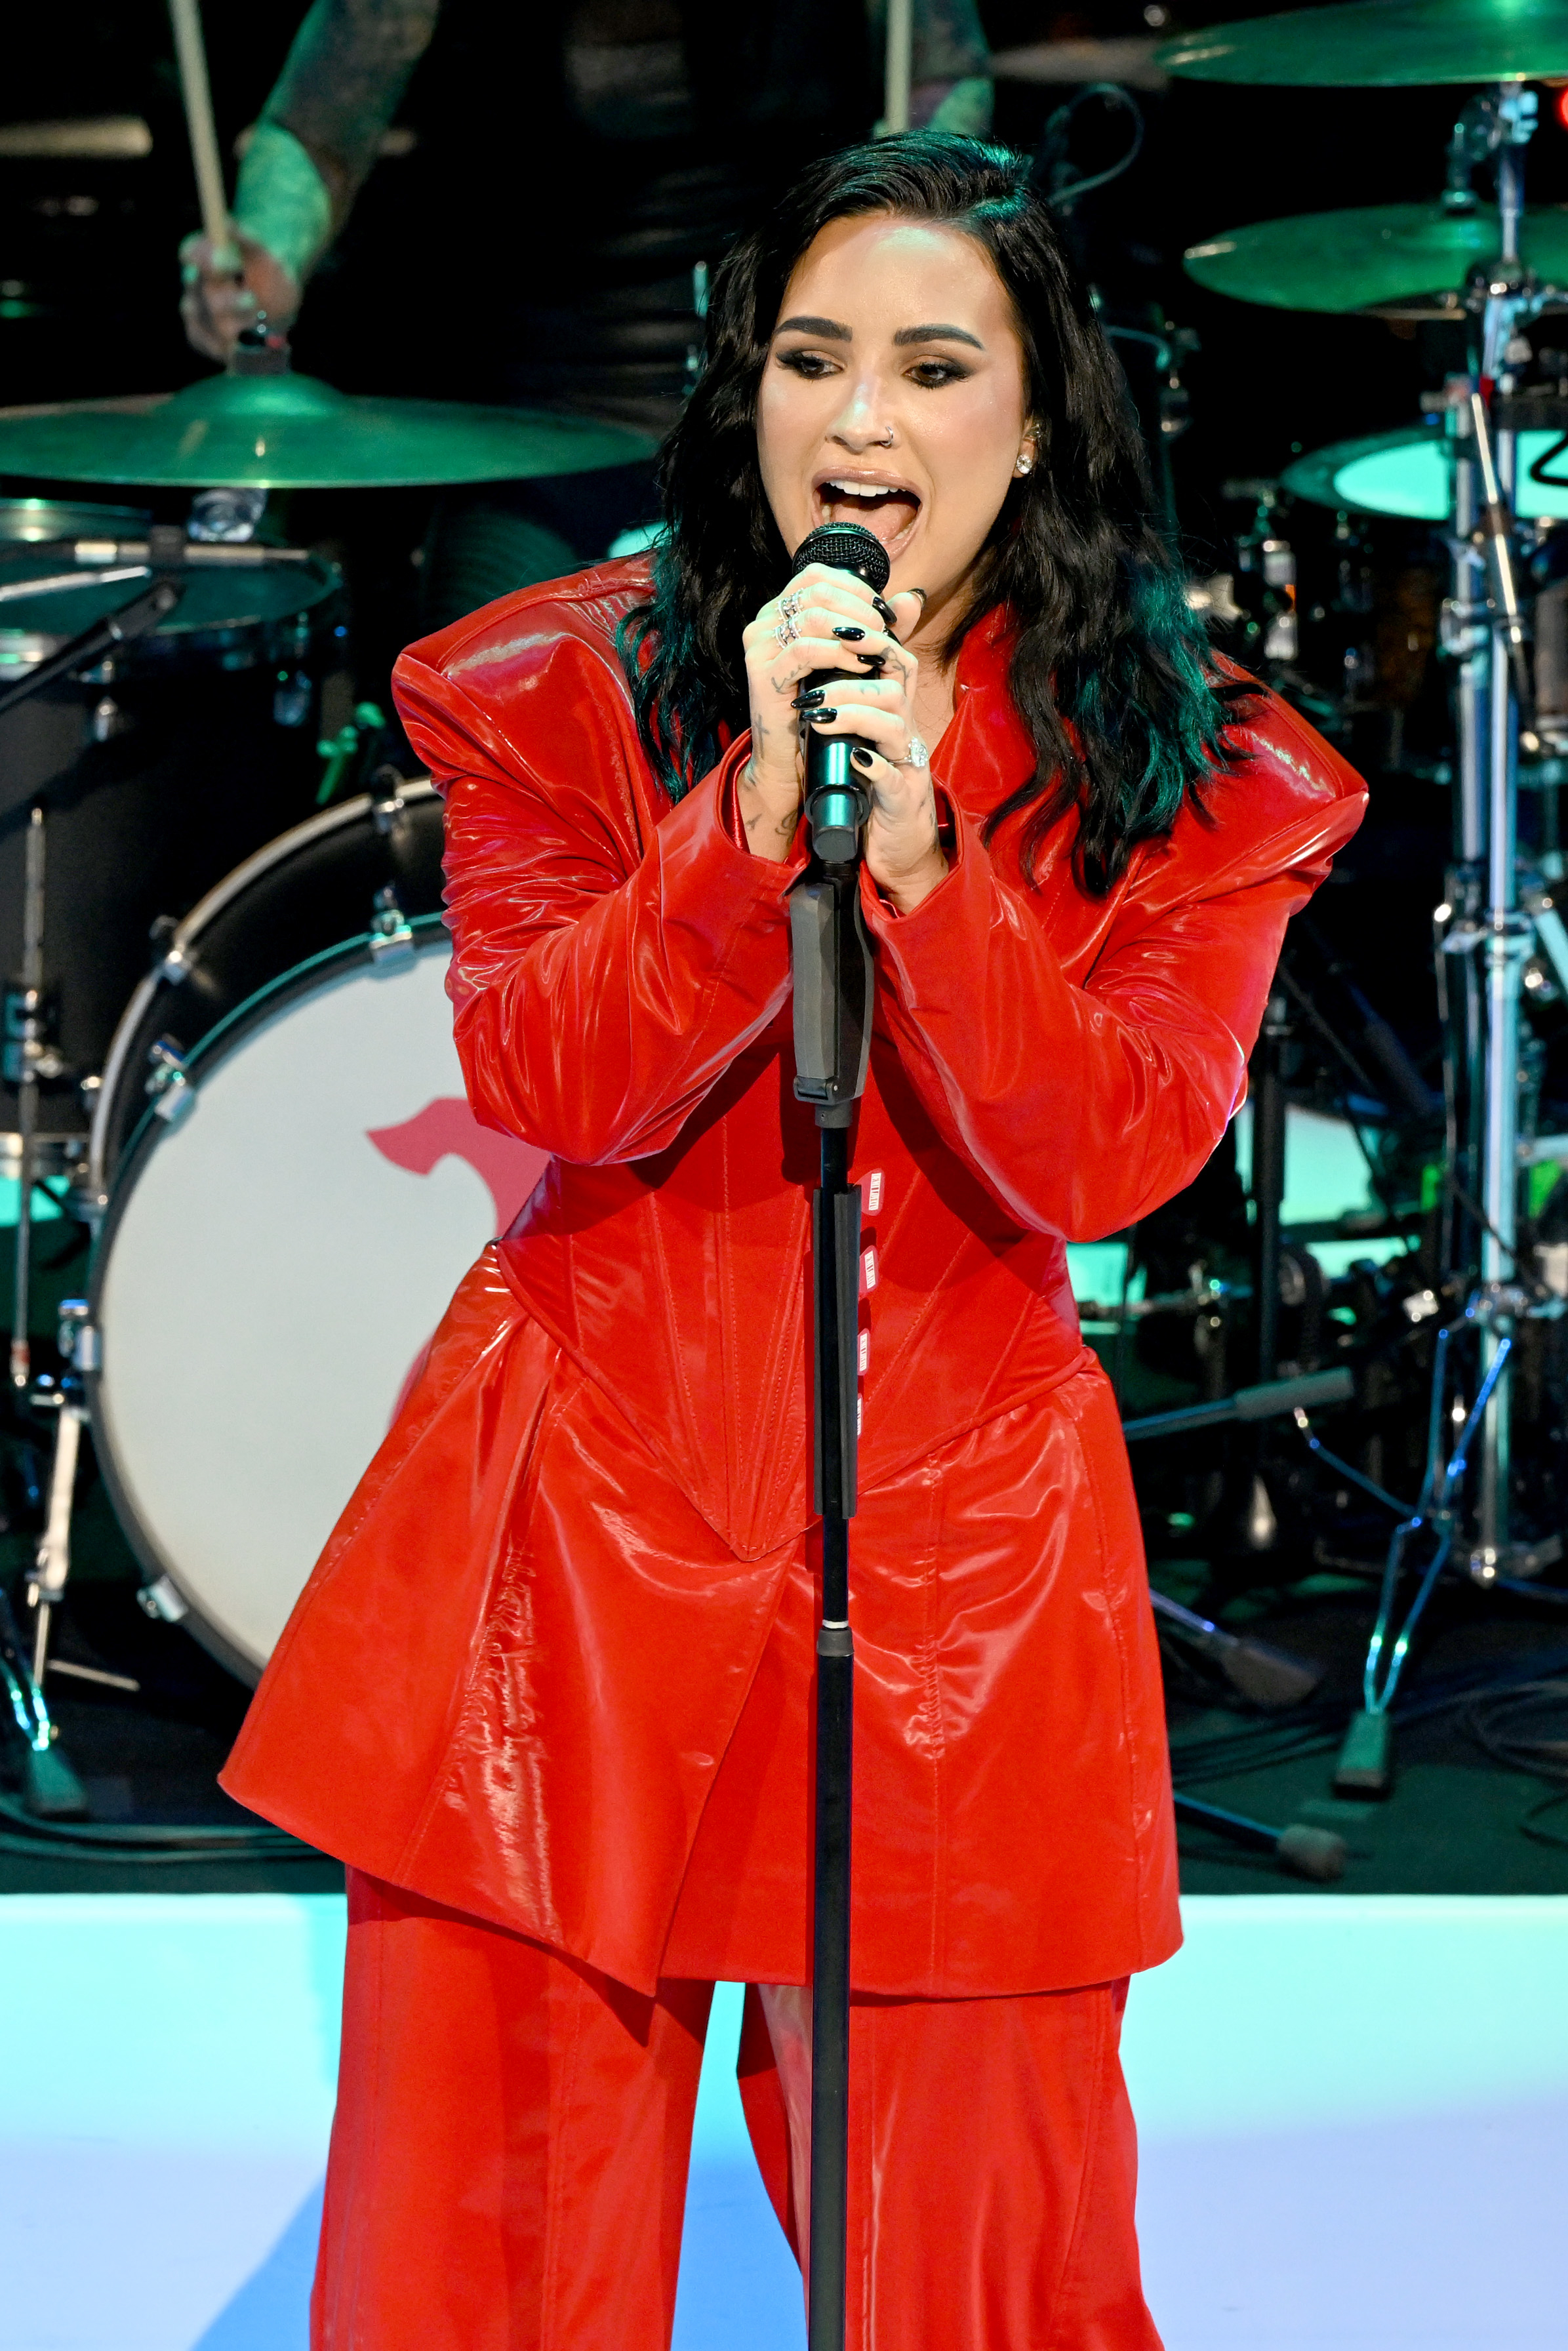 demi singing into a mic on the stand